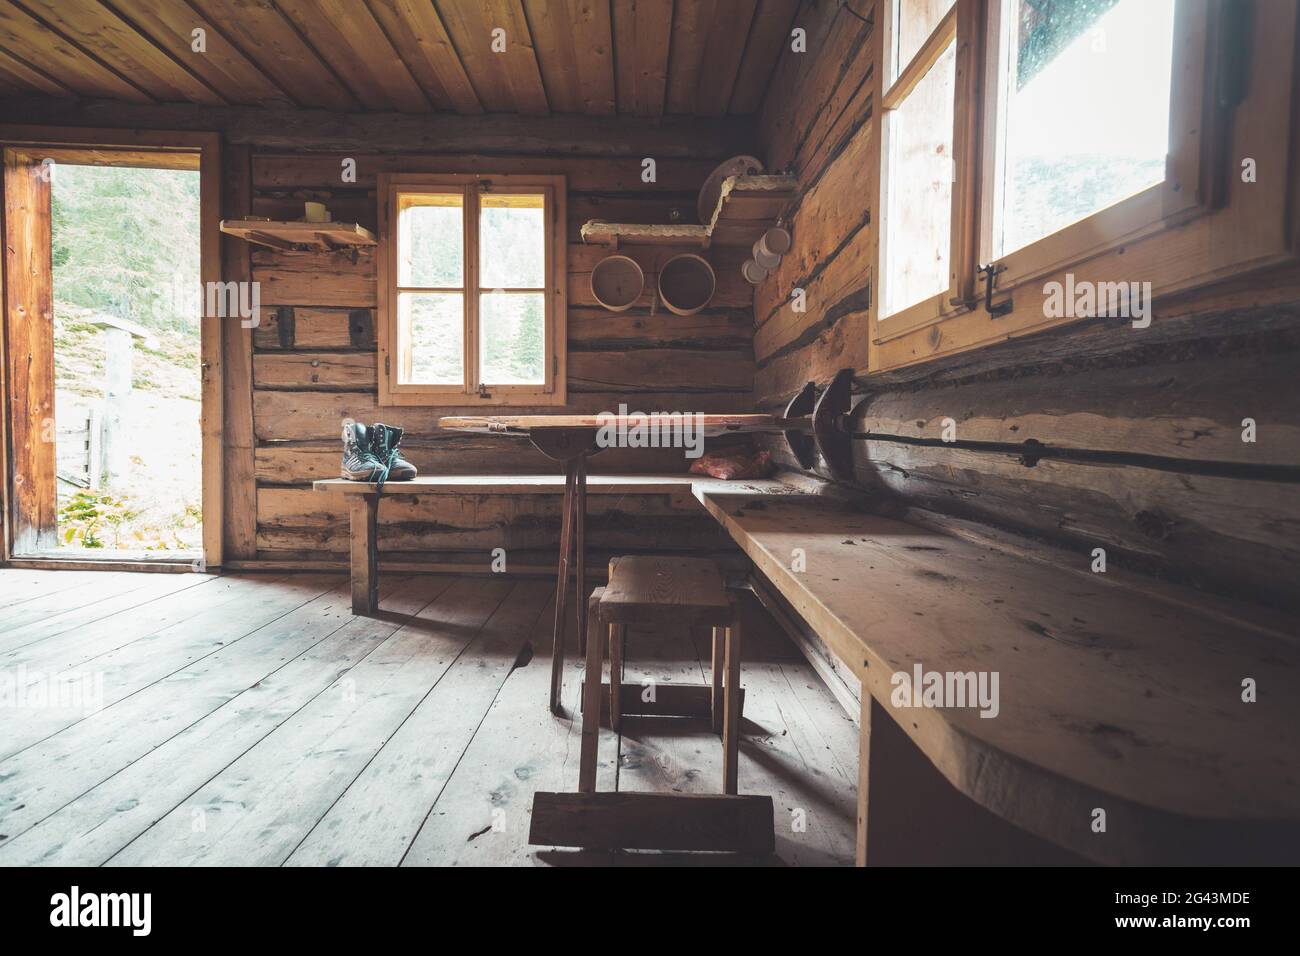 Abandoned mountain hut or chalet in Austria: rustic wooden interior Stock Photo